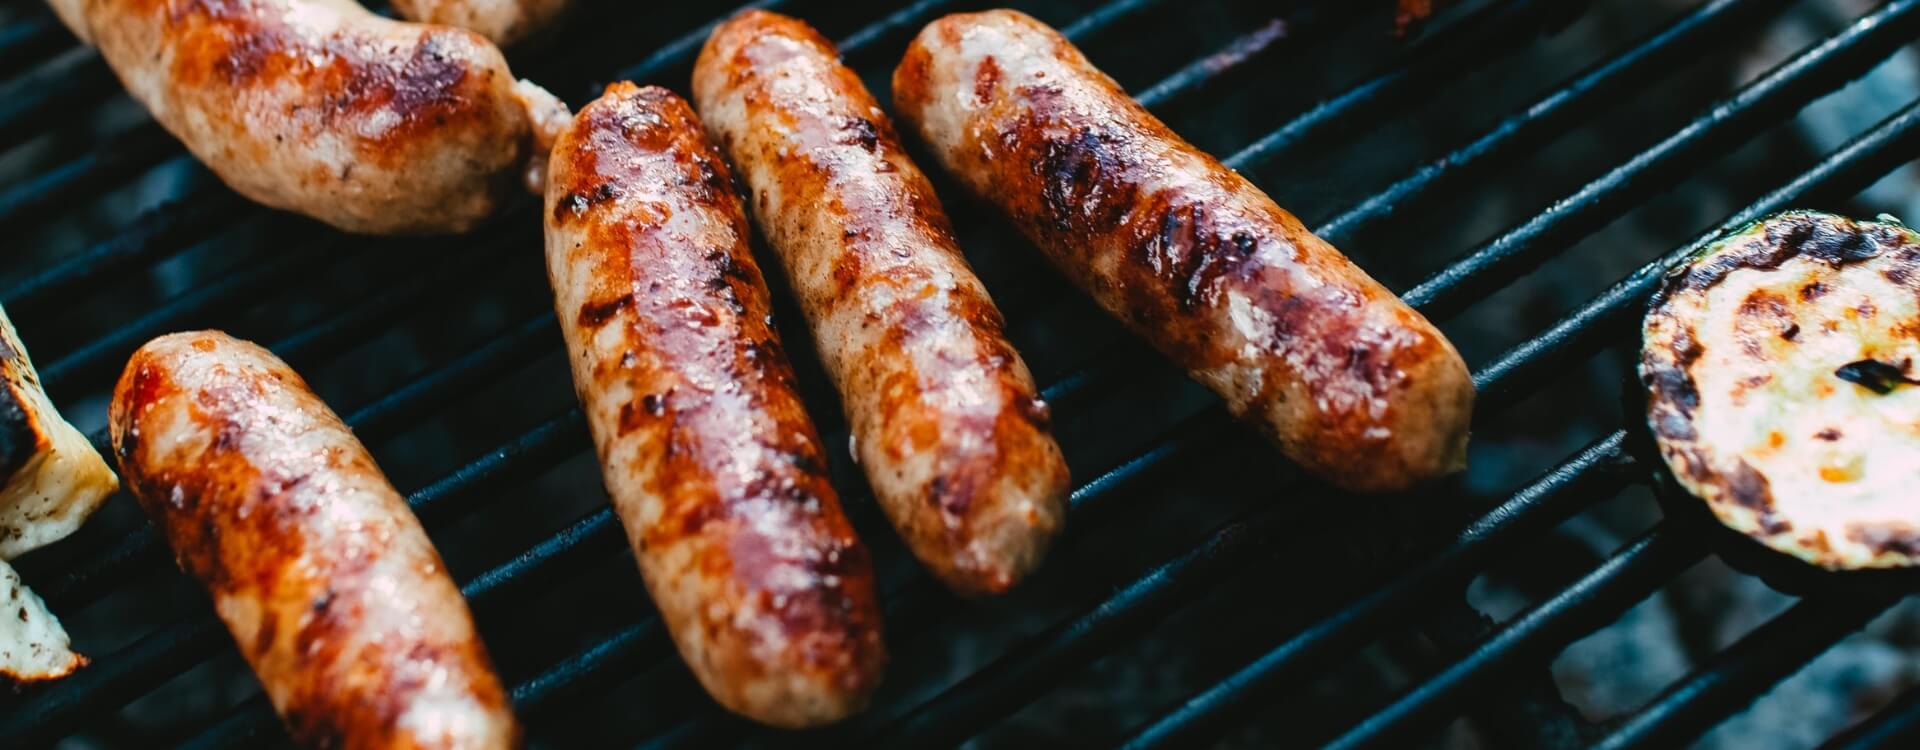 photograph of sausages